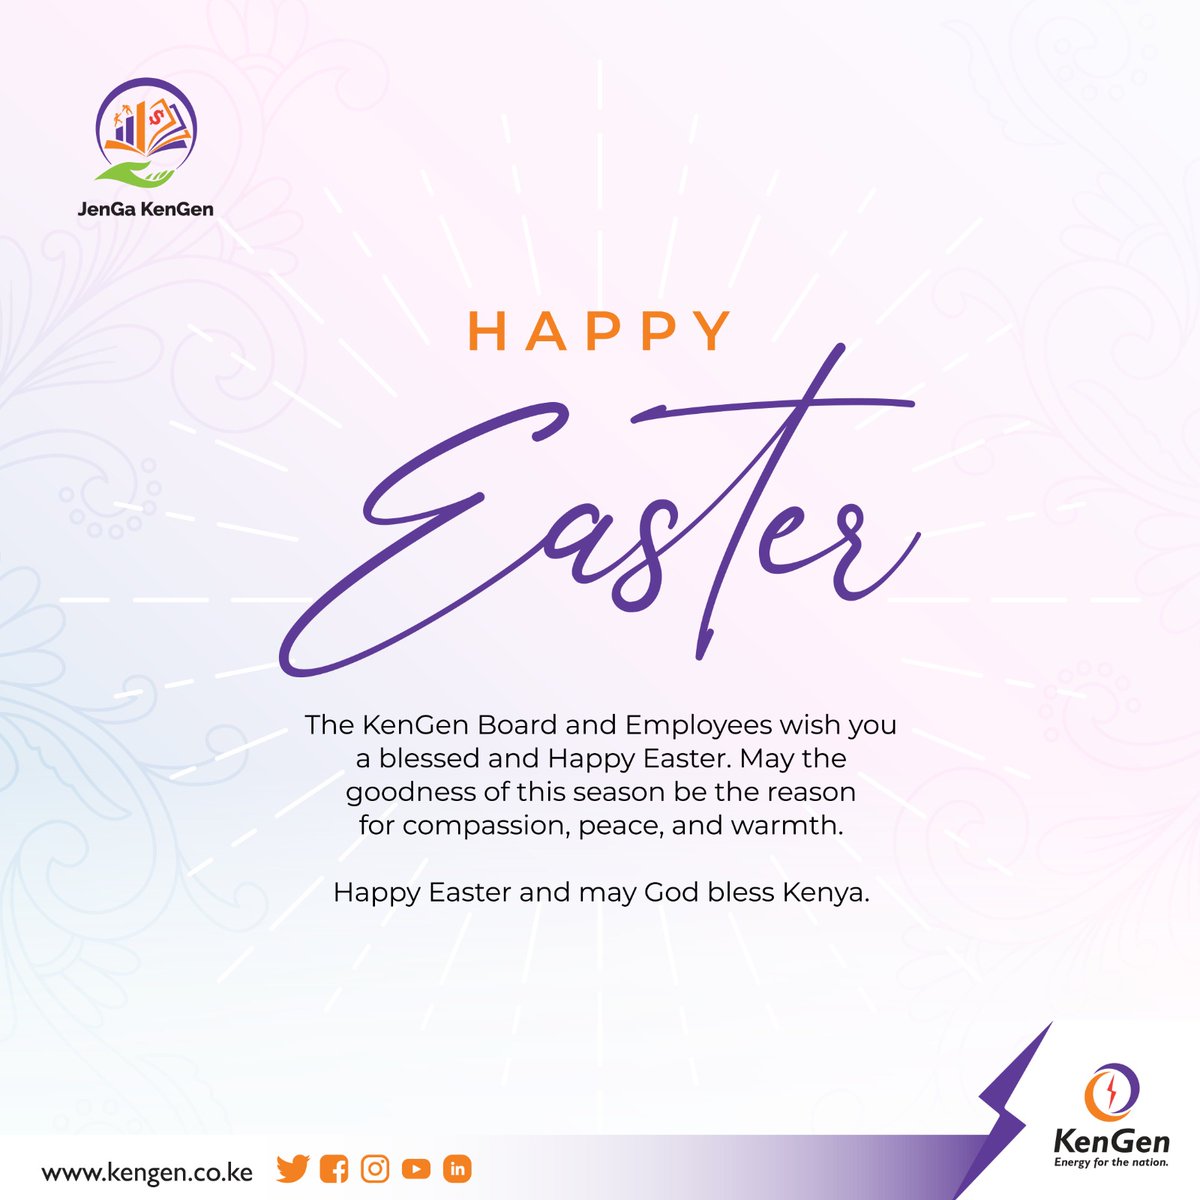 Wishing you a joyful Easter filled with hope and blessings from all of us at @KenGenKenya! 🐣#EasterHoliday ^EM